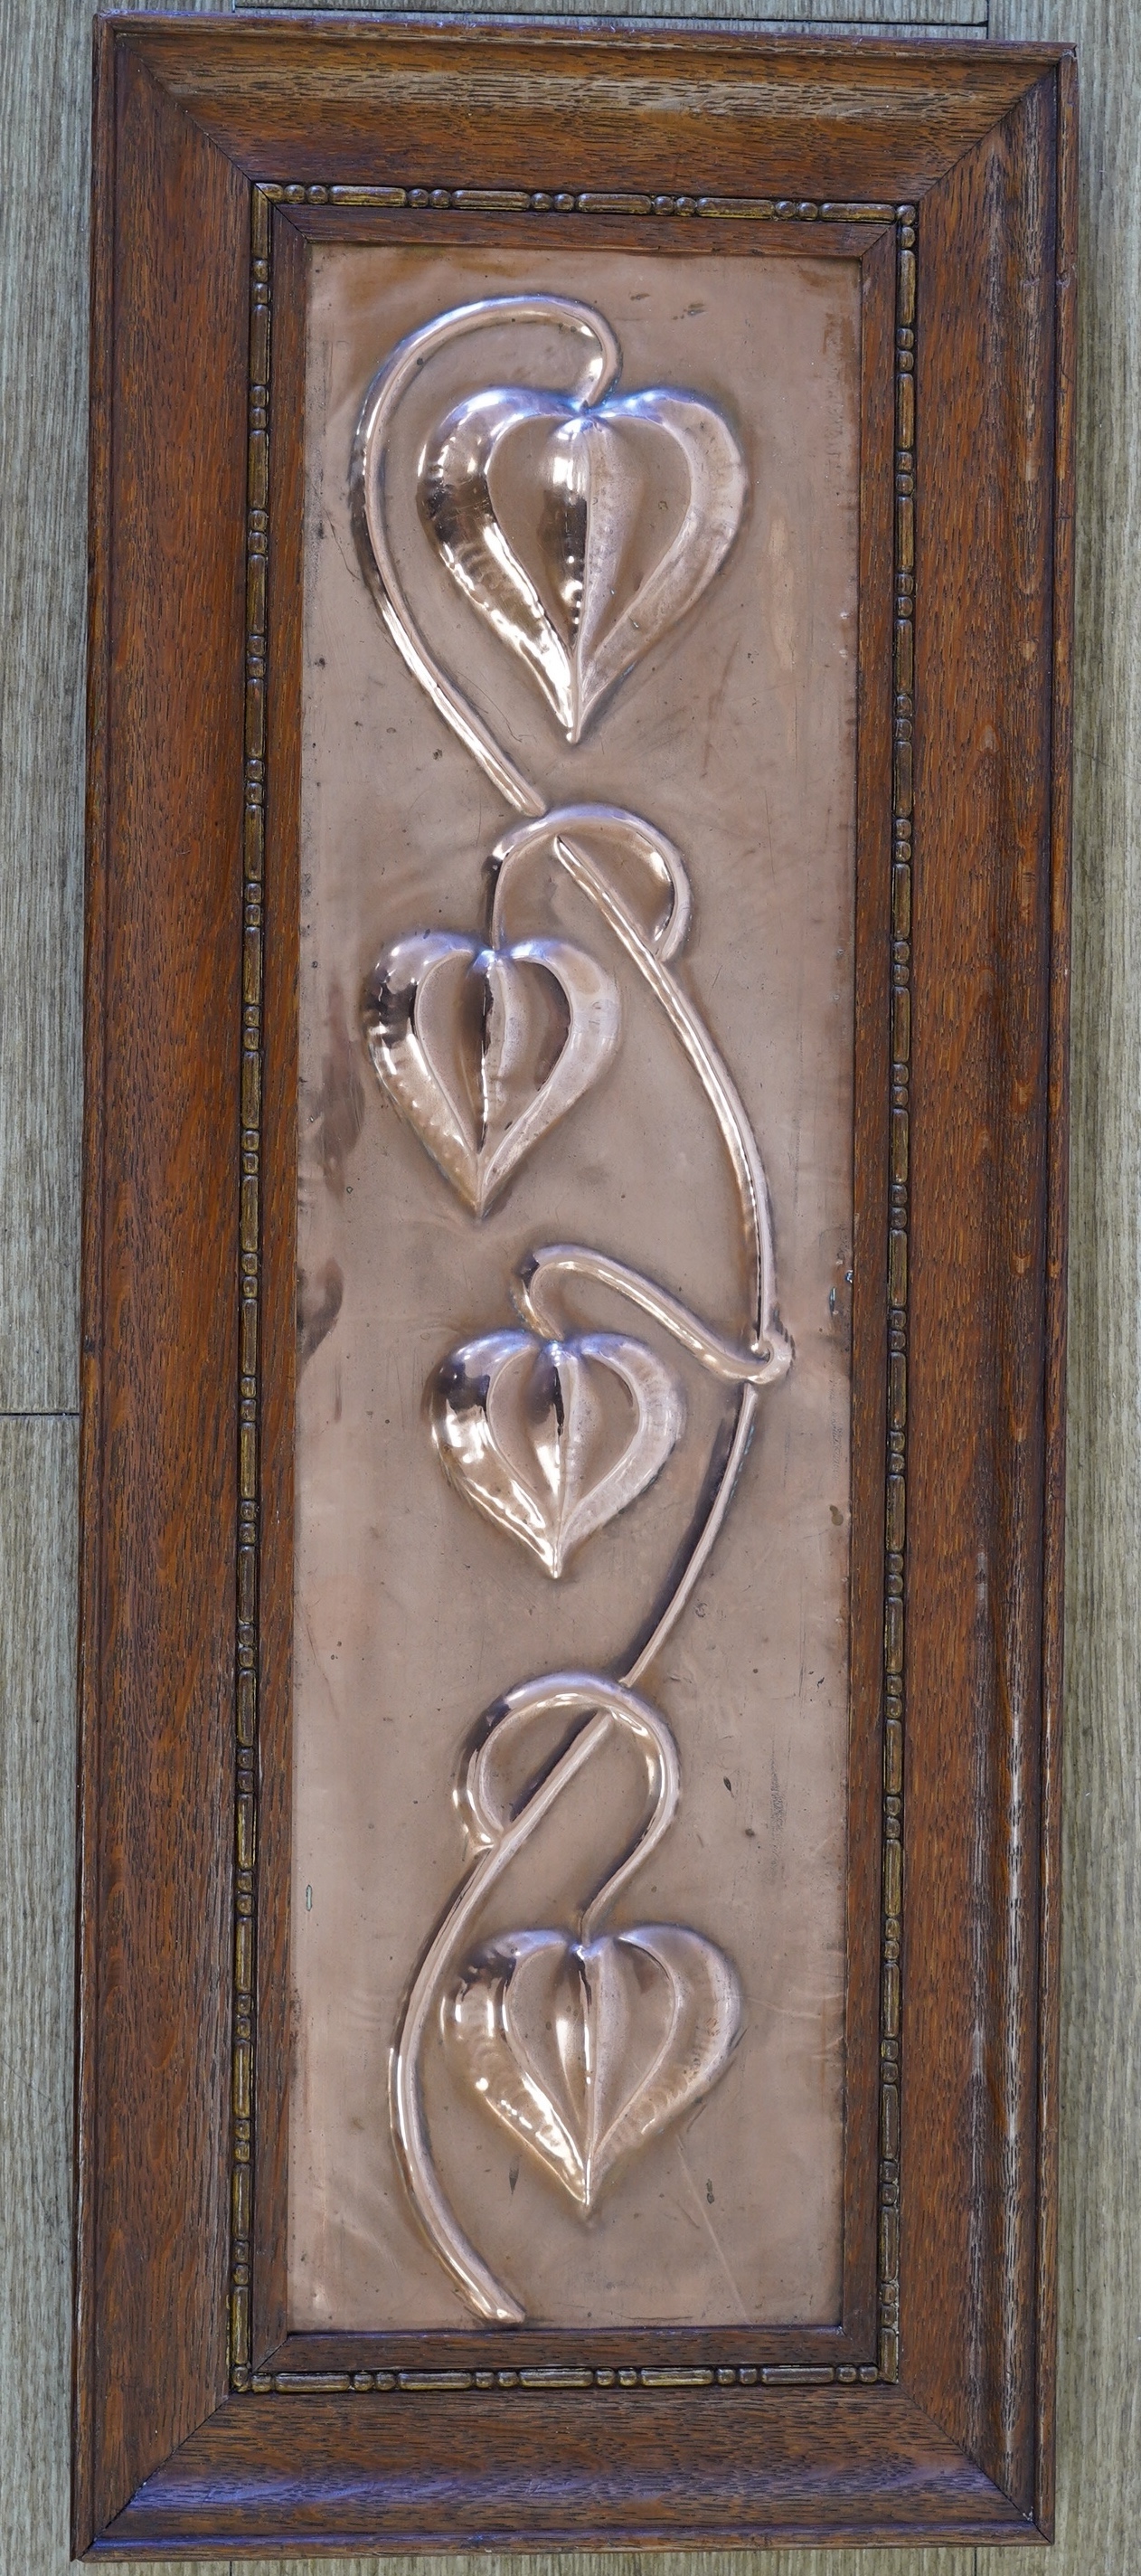 In the manner of Pearson, an Arts & Crafts embossed copper panel, oak framed, 59 x 24cm including frame. Condition - fair to good